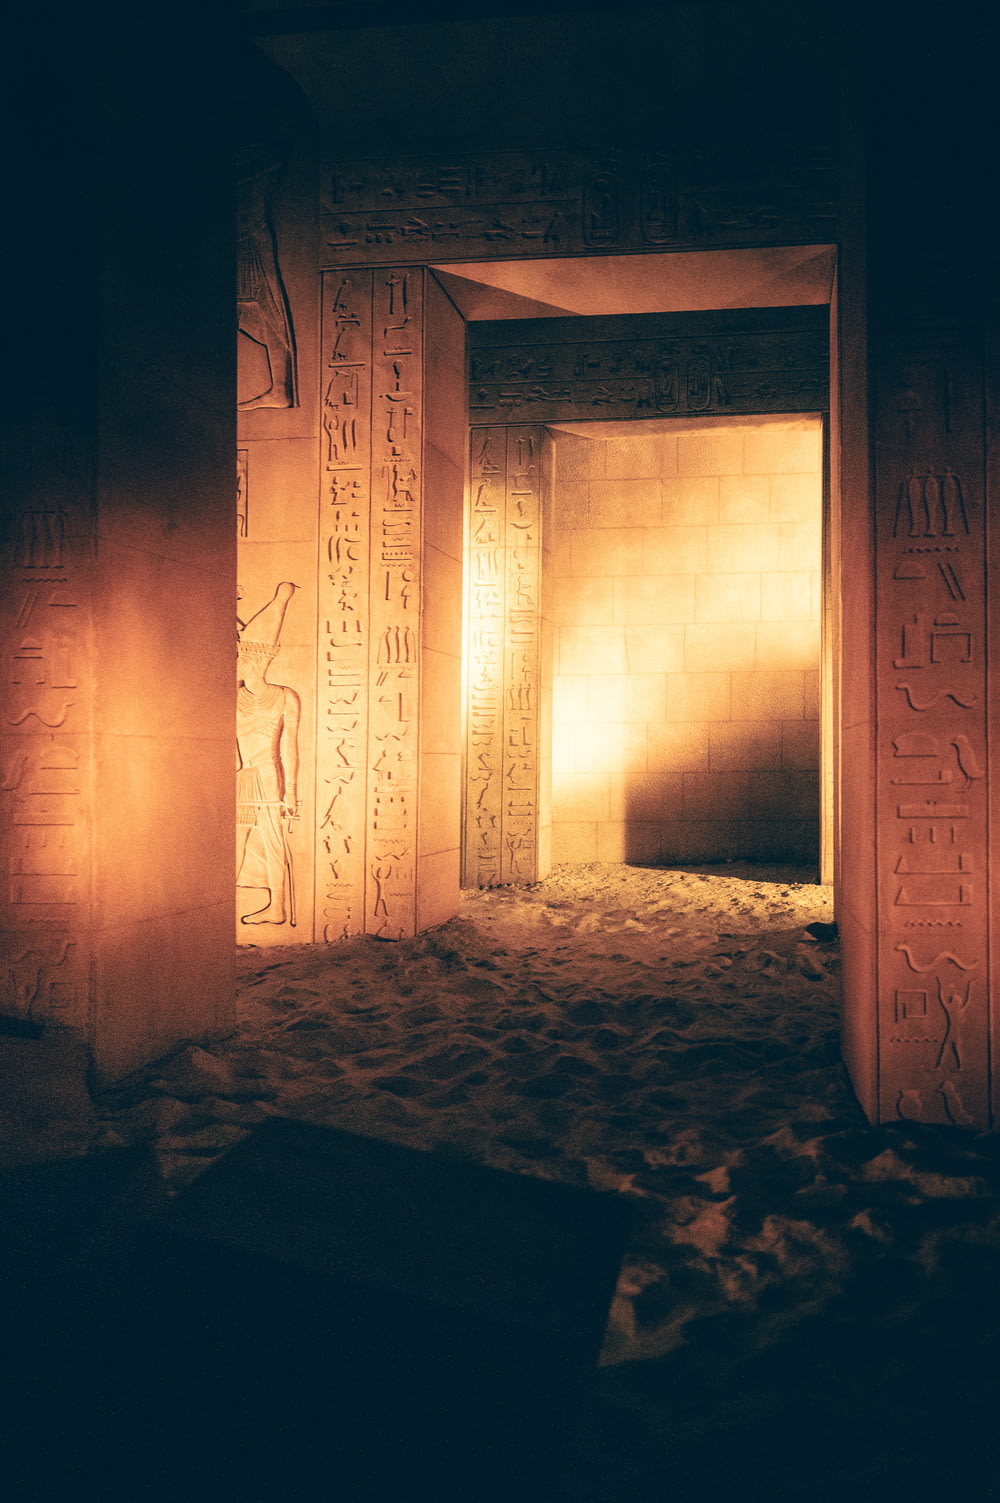 a dimly lit room with egyptian writing on the walls